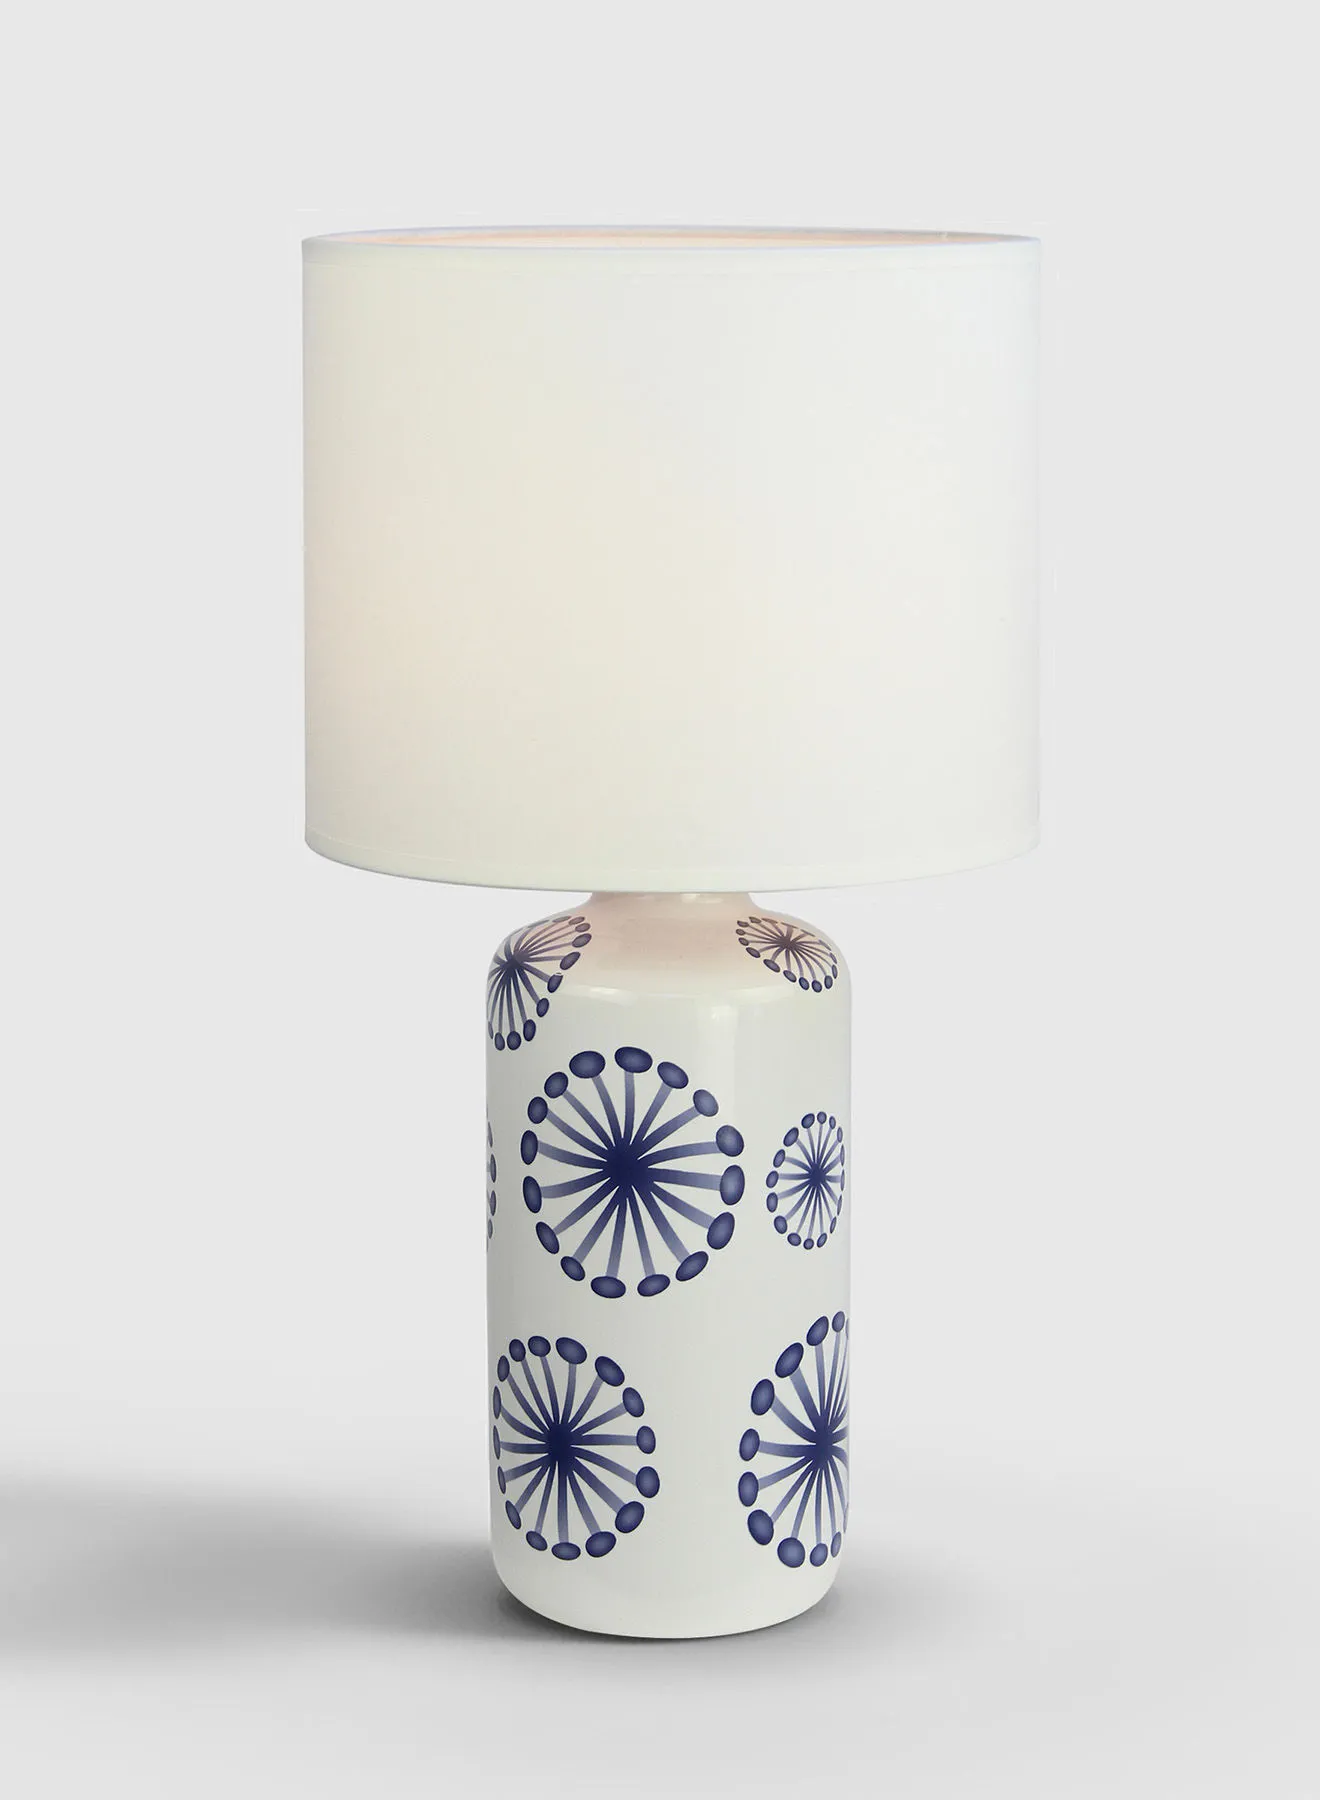 Switch Dandelion Ceramic Table Lamp Unique Luxury Quality Material for the Perfect Stylish Home AT16102 Blue/Off White 25 x 49 Blue/Off White 25 x 49cm